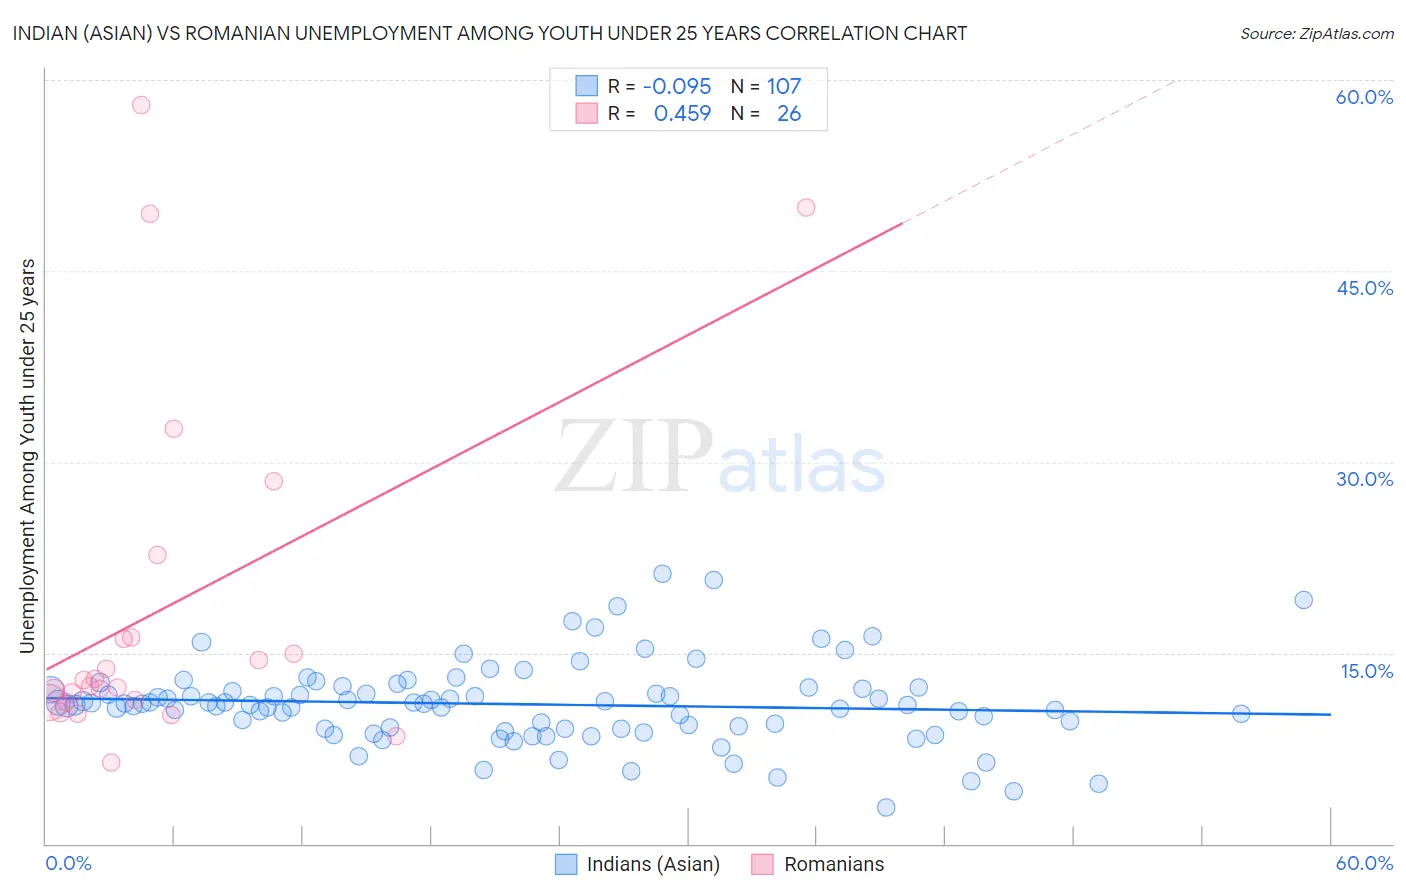 Indian (Asian) vs Romanian Unemployment Among Youth under 25 years